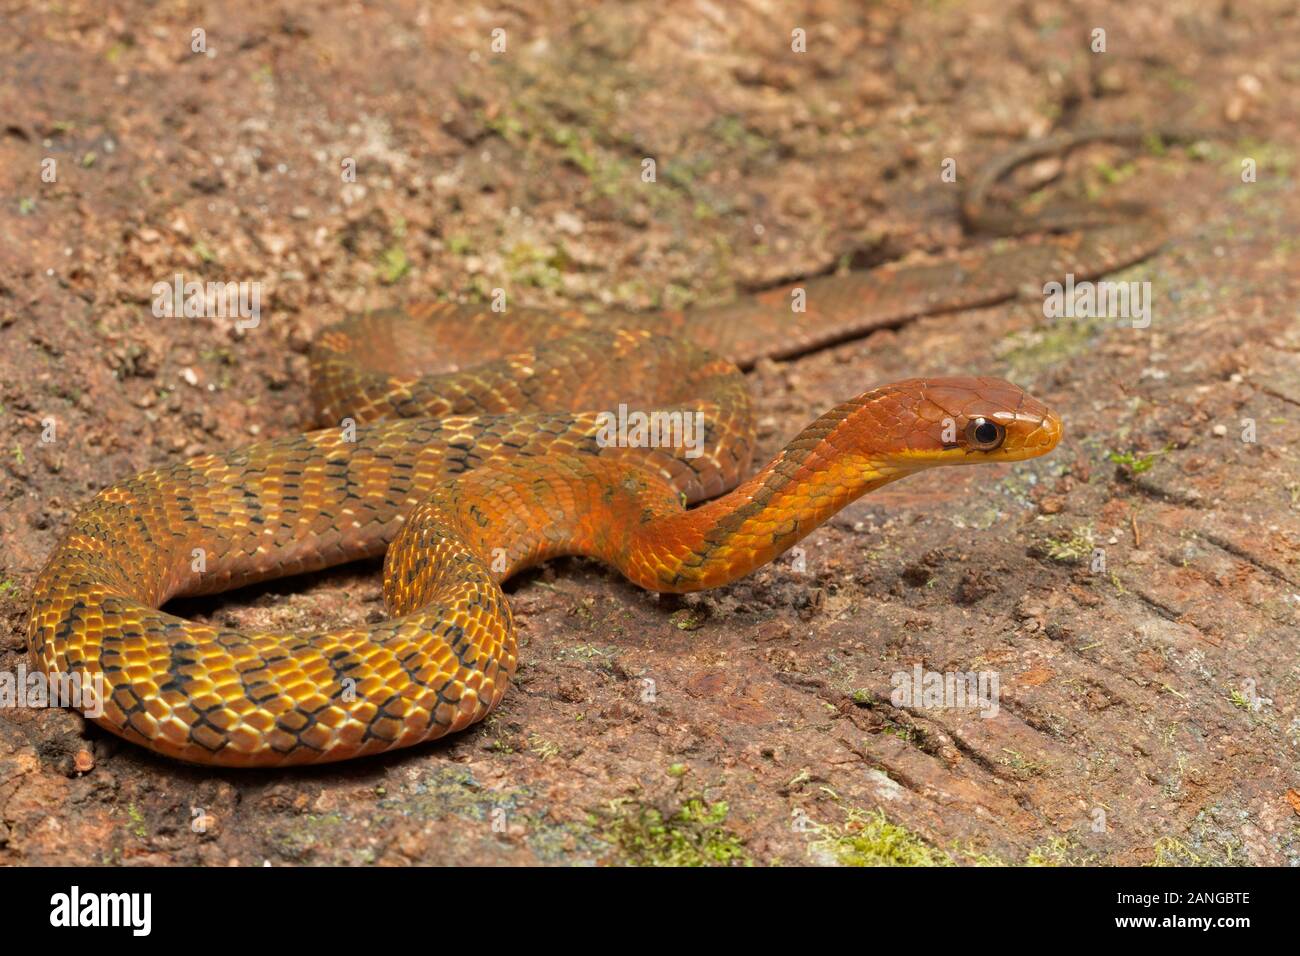 Pseudoxenodon macrops, commonly known as the large-eyed bamboo snake or the false cobra endemic to Asia. Stock Photo